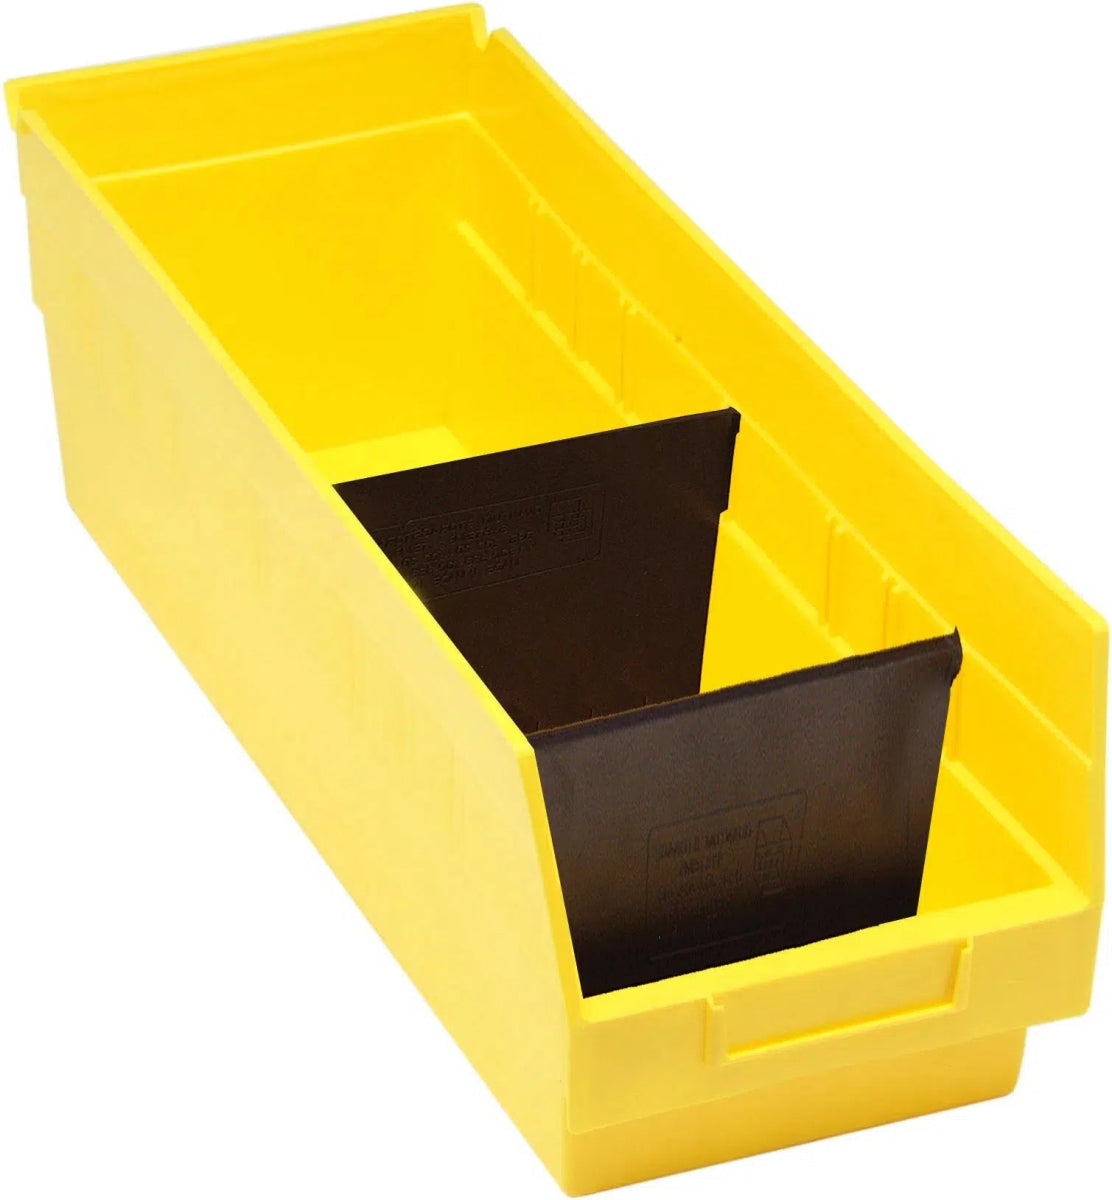 Storage Bins for Shelves - Industrial 4 Less